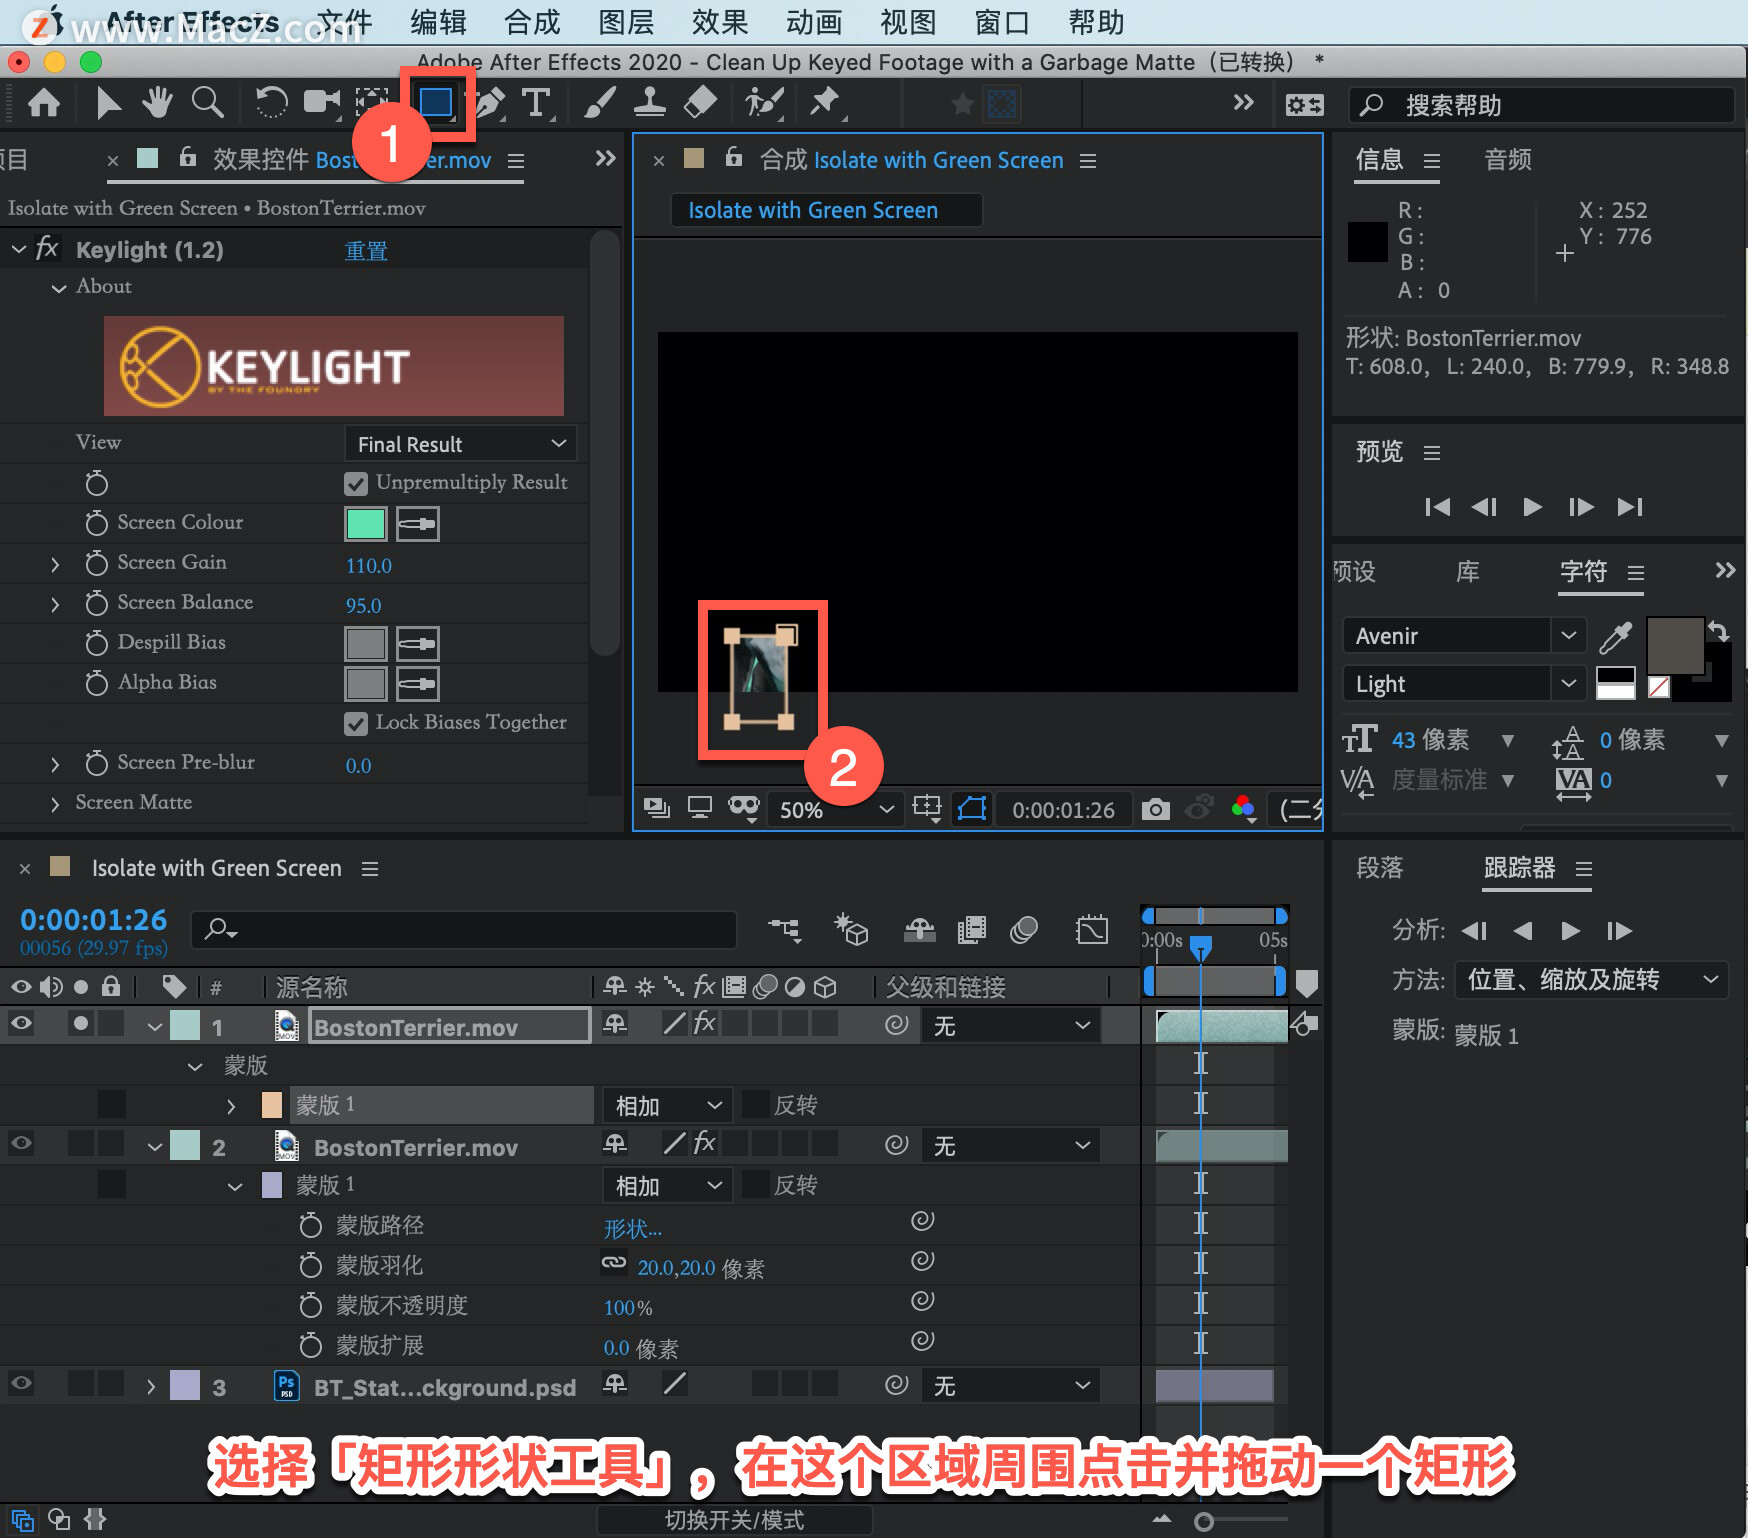 After Effects 教程「38」，如何在 After Effects 中创建复制图层清理素材？